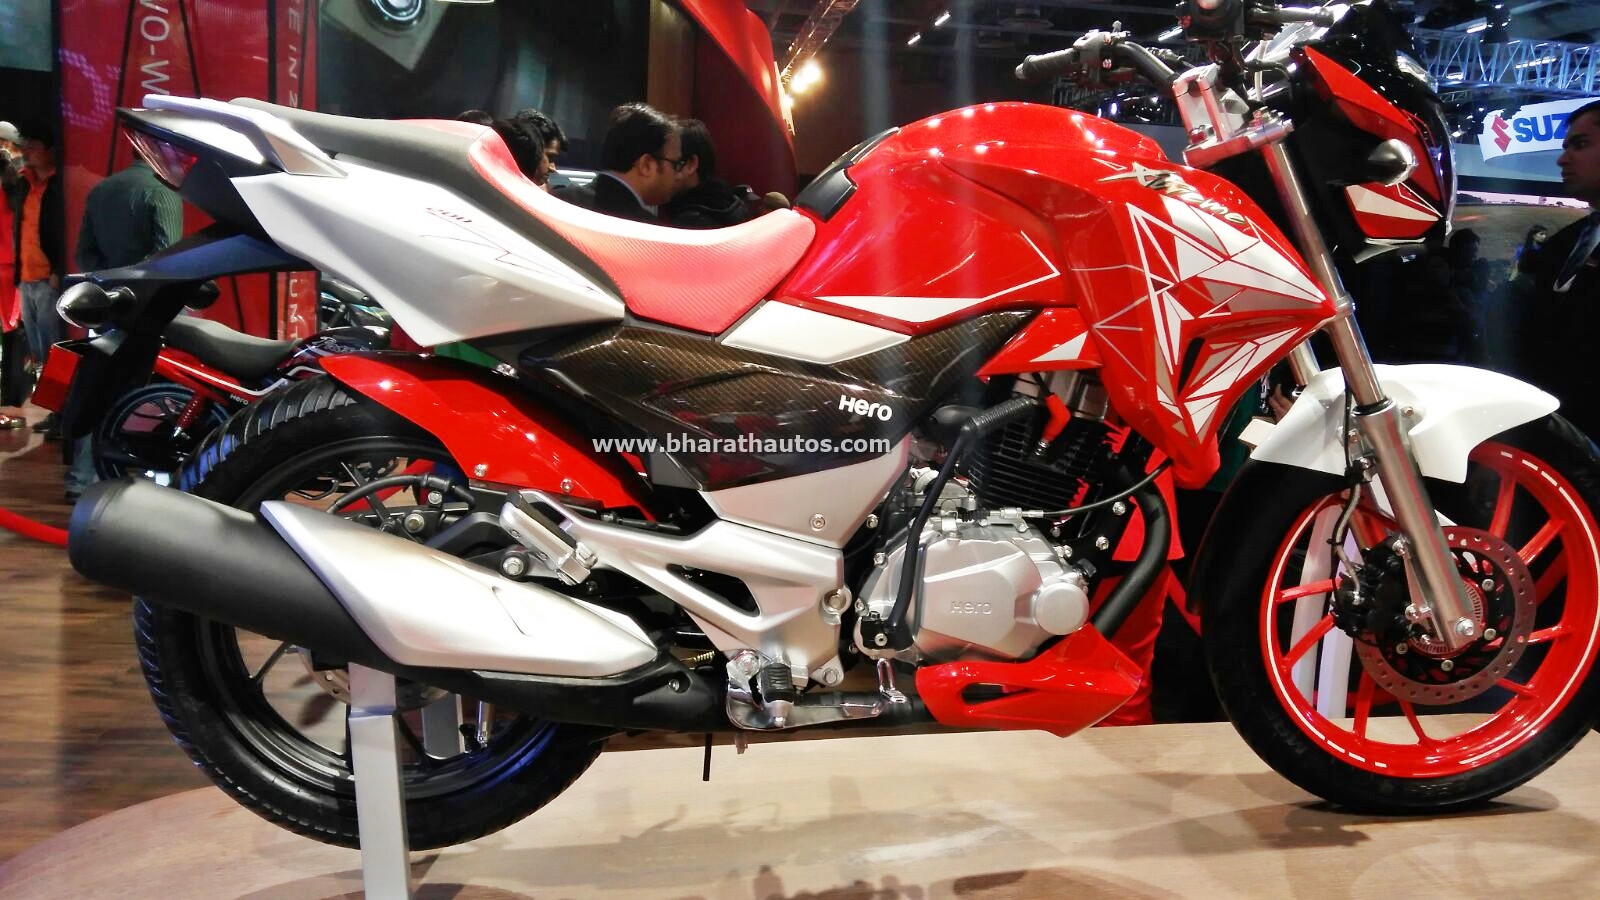 Rtr 200 Ns 200 Rival Hero Xtreme 200s Rumoured To Be Launched